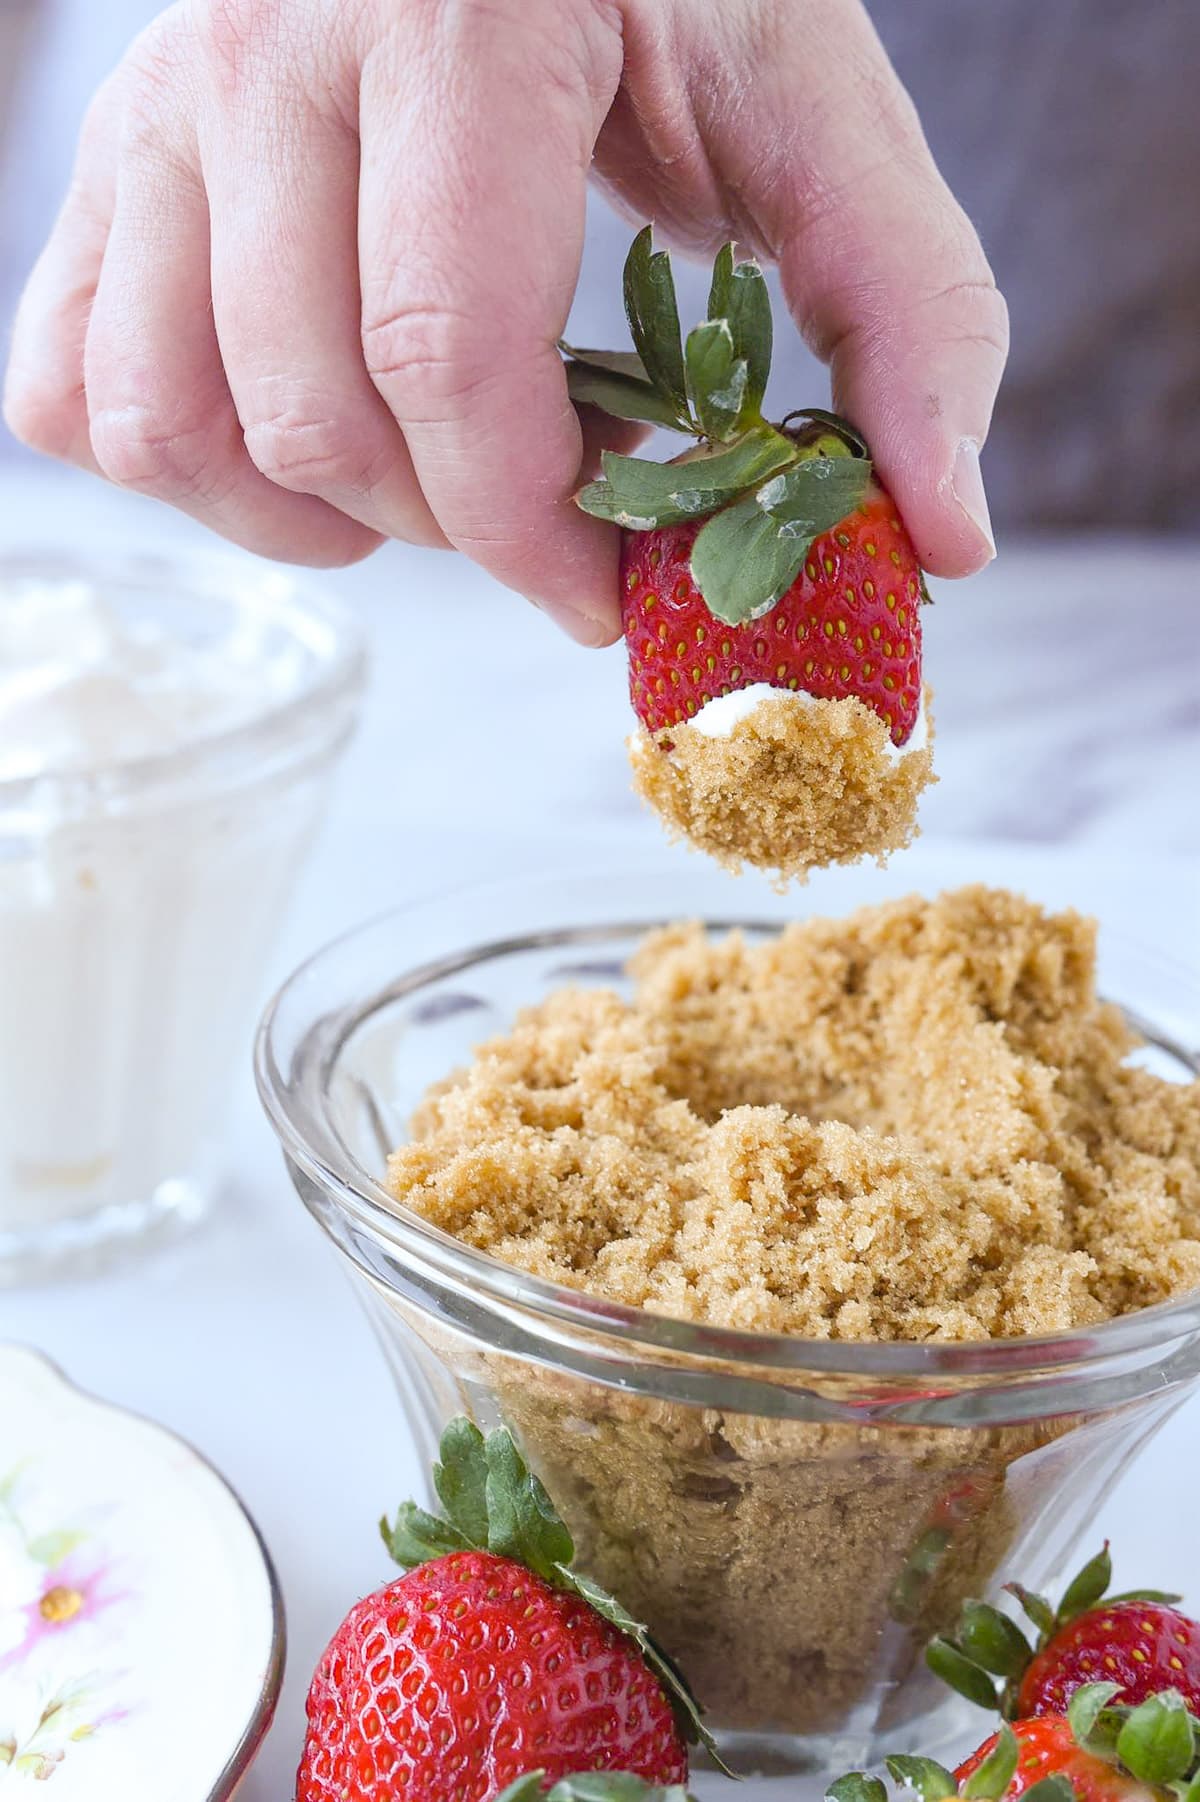 dipping a strawberry into sour cream and brown sugar